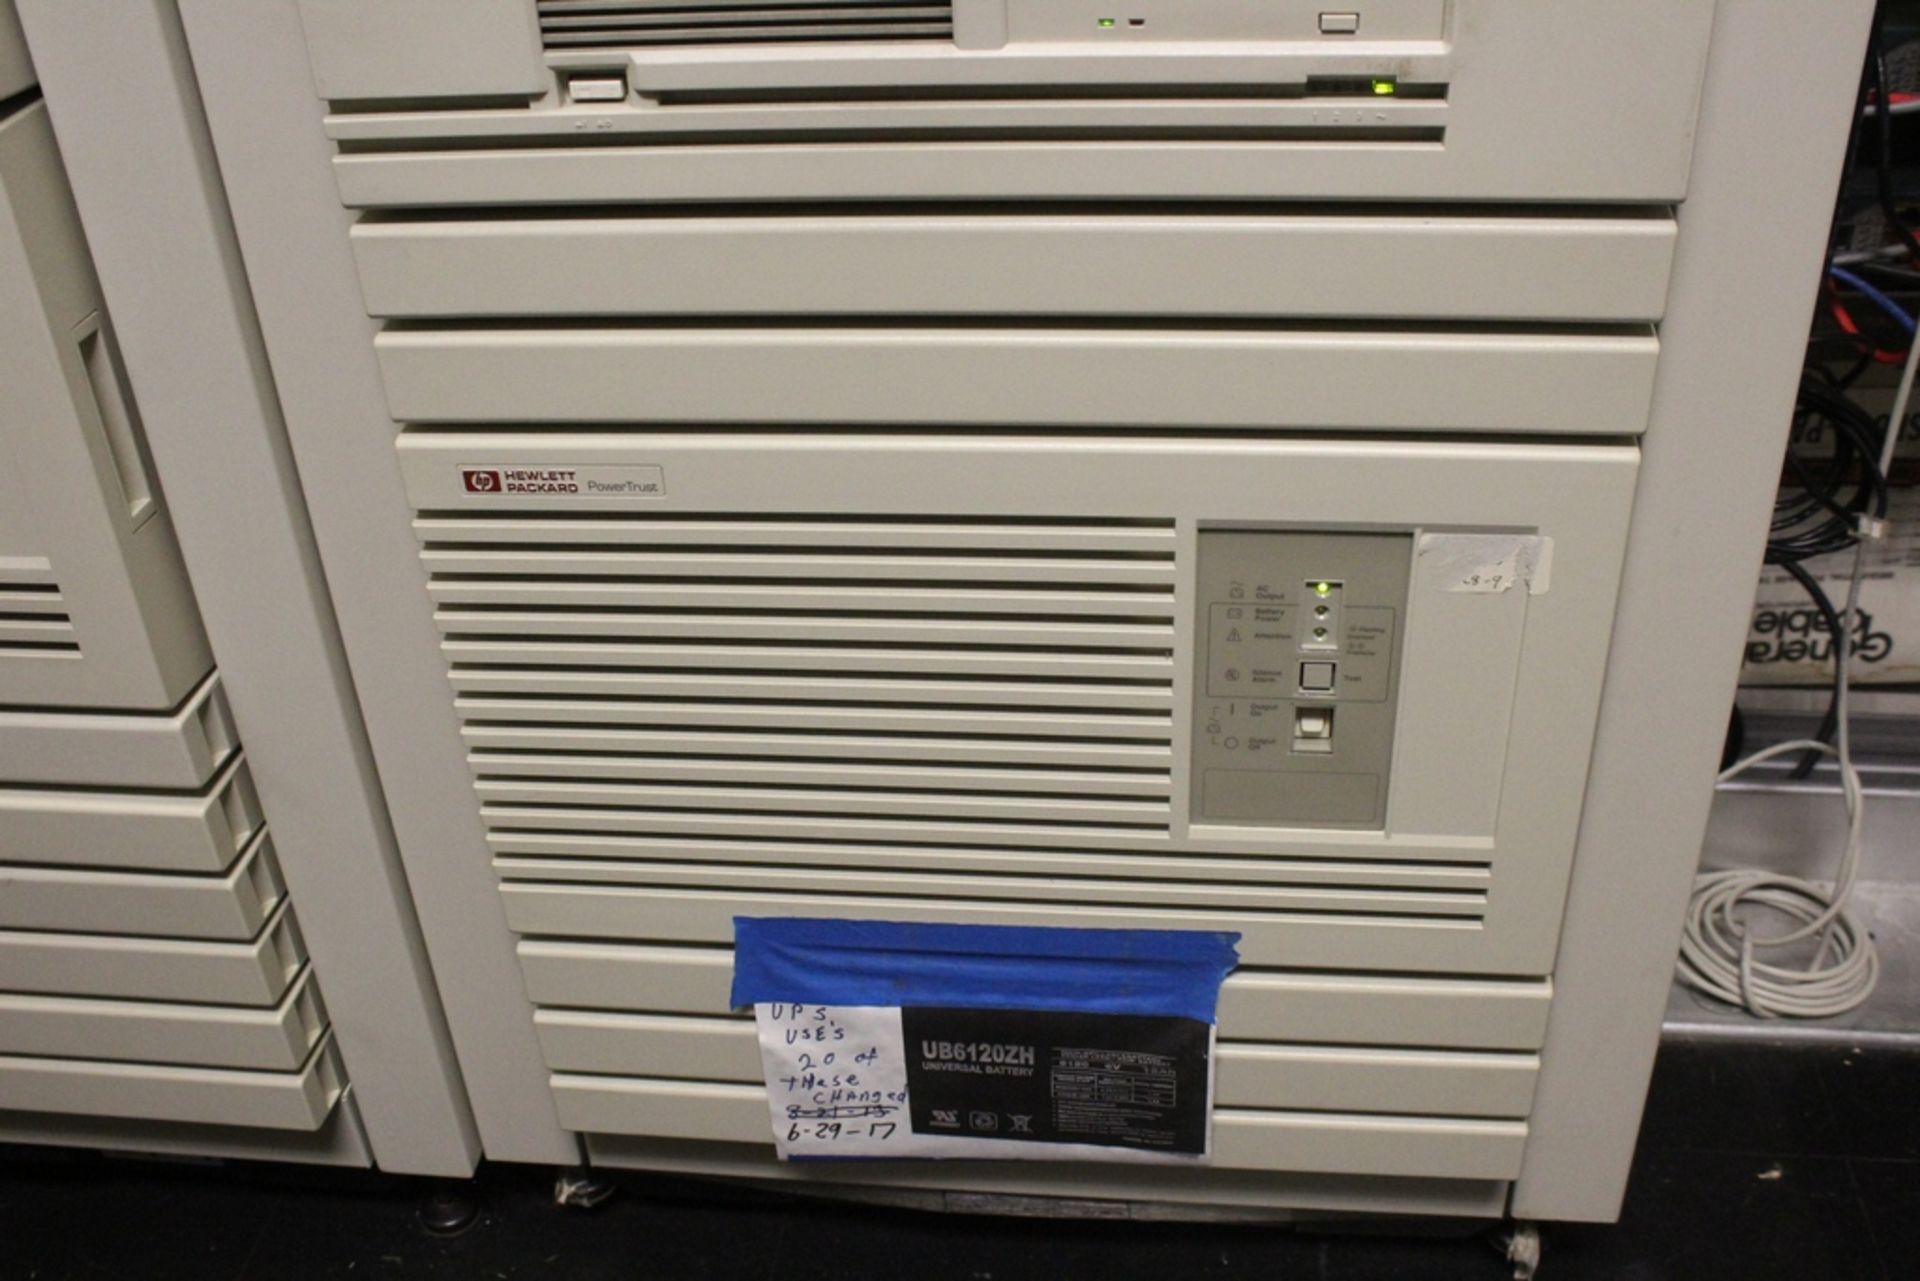 HEWLETT PACKARD SERVER SYSTEM WITH K-CLASS 9000, SCSI SE AND POWER TRUST - Image 6 of 6